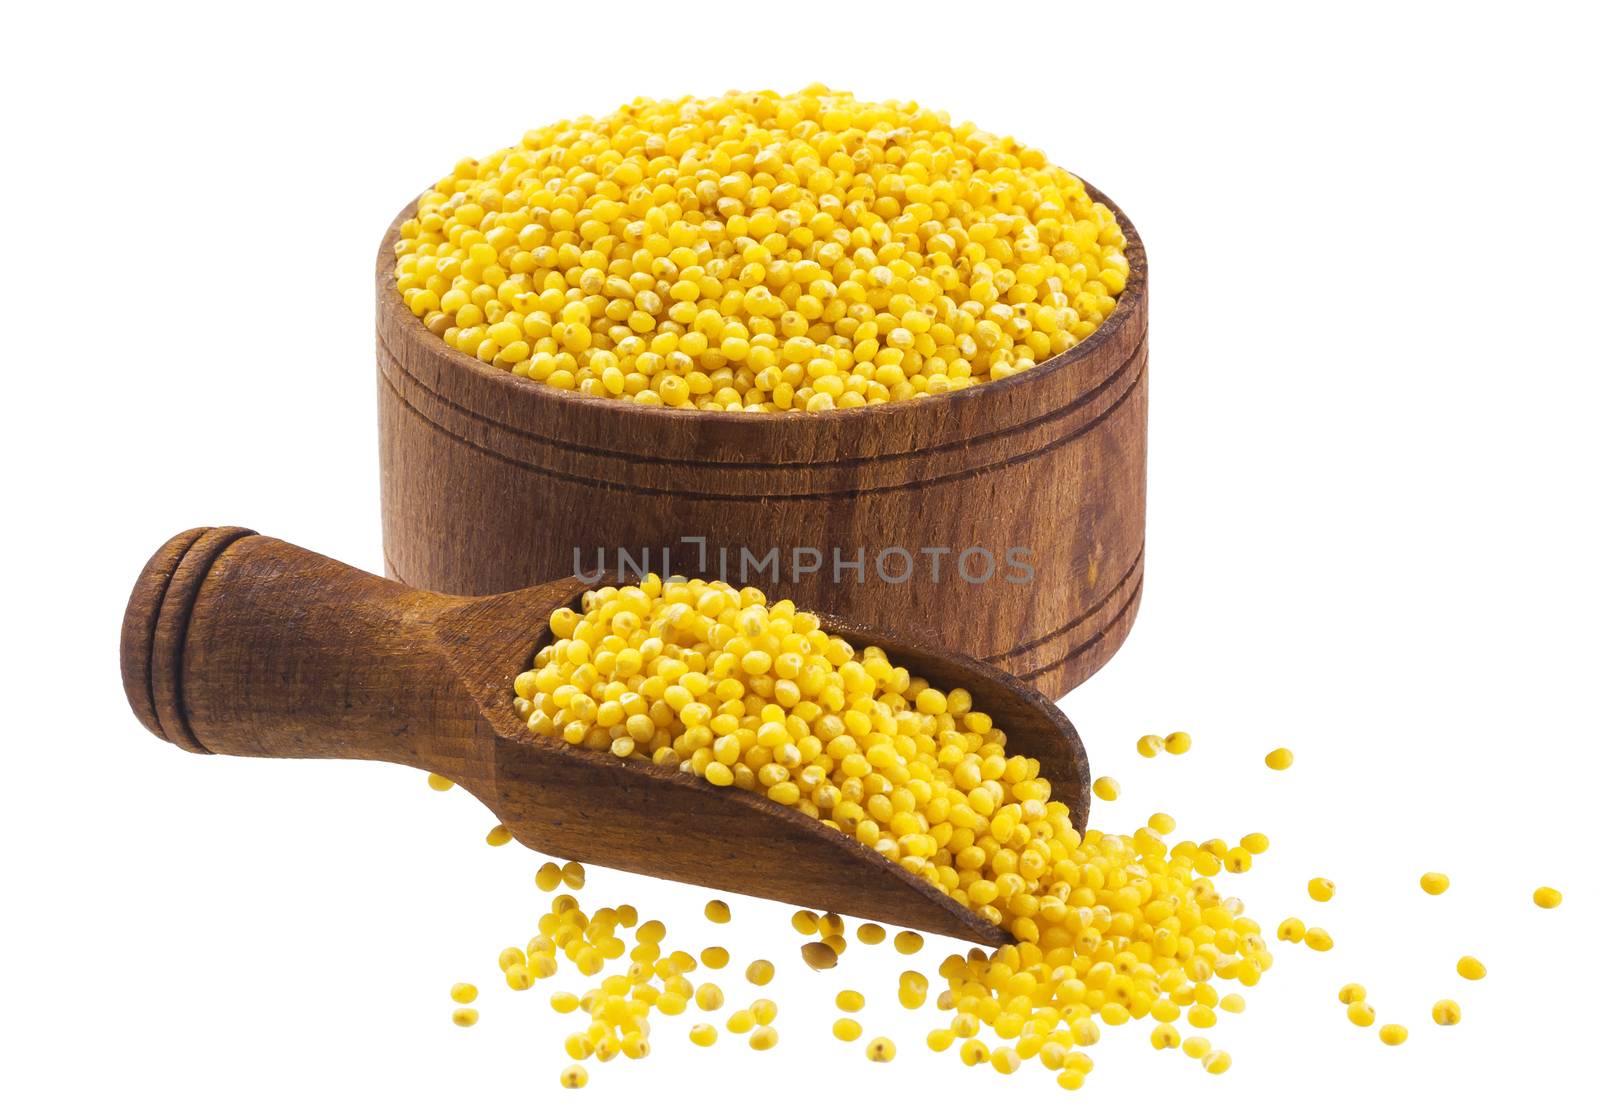 Millet in wooden bowl isolated on white background with clipping path. Close-up